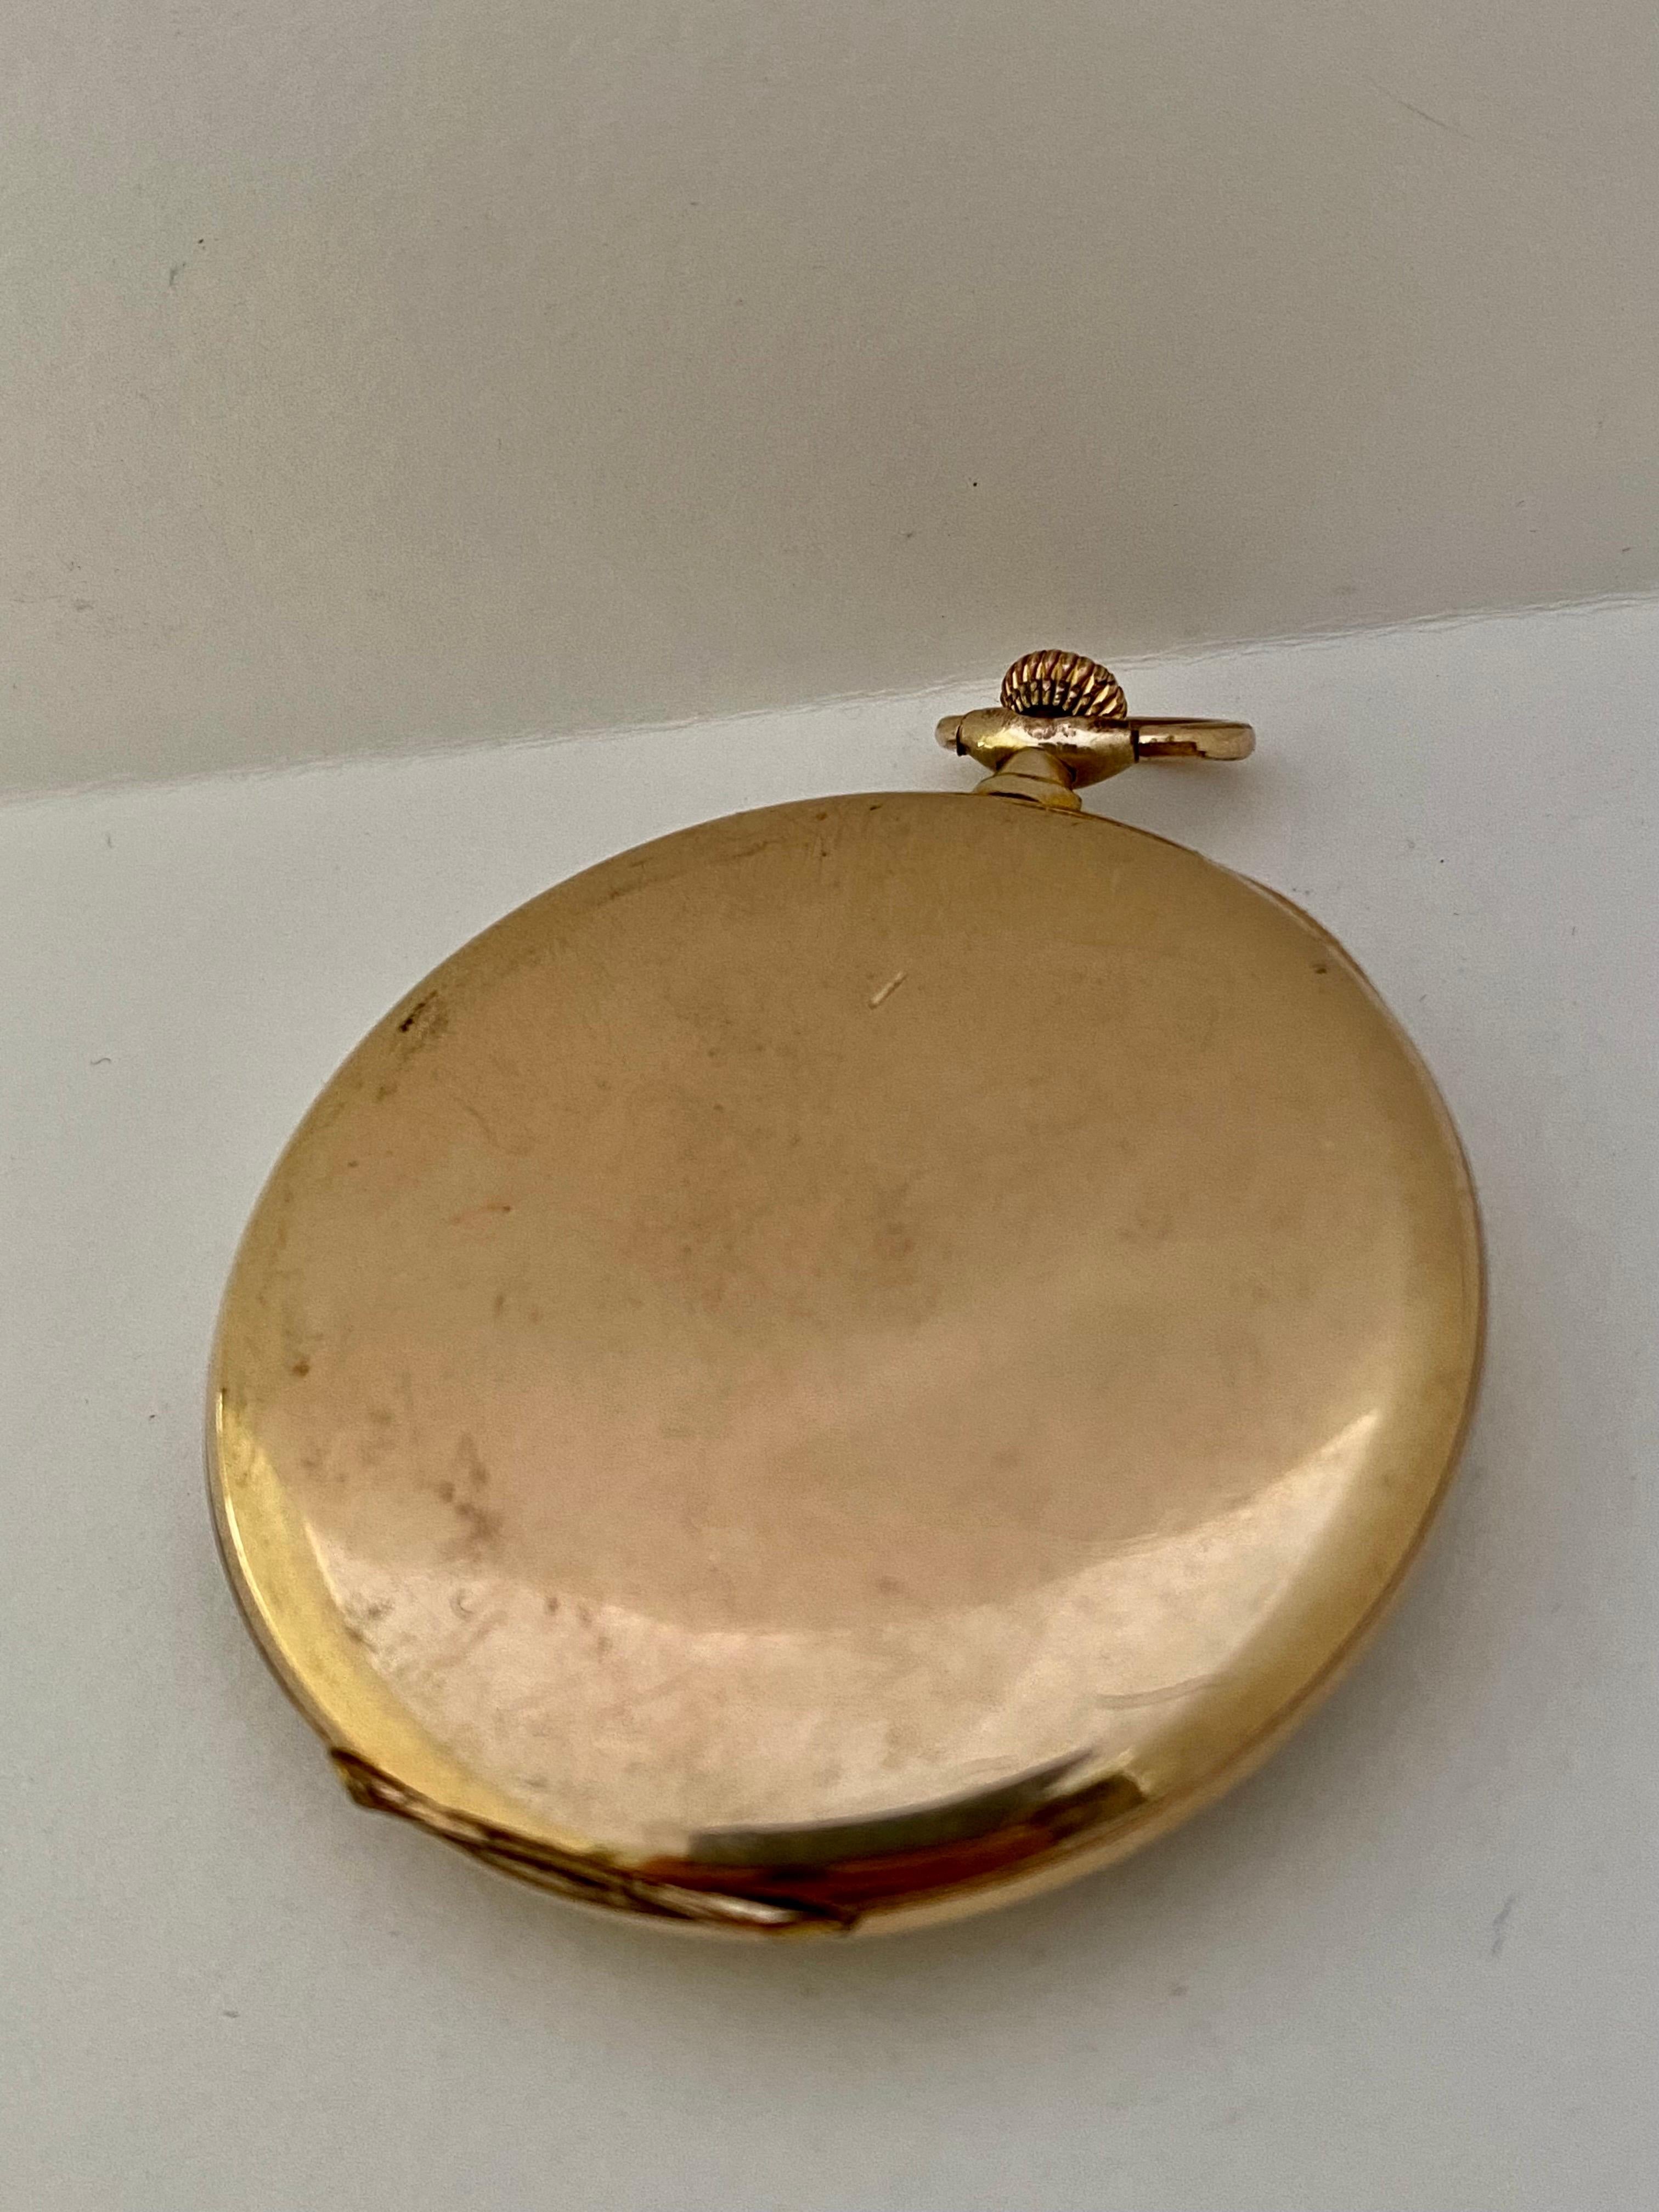 This beautiful 47mm diameter (excluding crown) Keyless mechanical Swiss pocket watch is in good working condition and it is running well. Visible signs of ageing and wear with tiny surface marks on the silvered dial and on the glass and watch case.